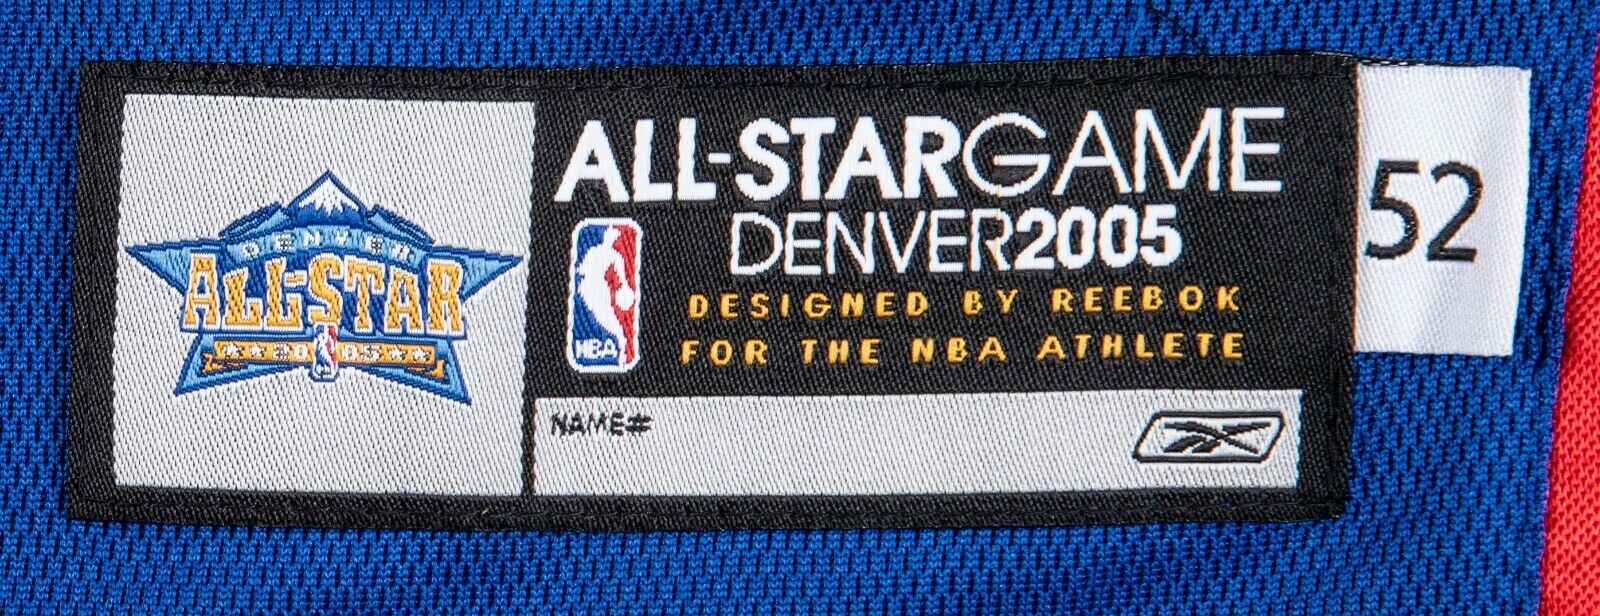 Beautiful Lebron James Signed 2005 First All Star Game Jersey Upper Deck UDA COA